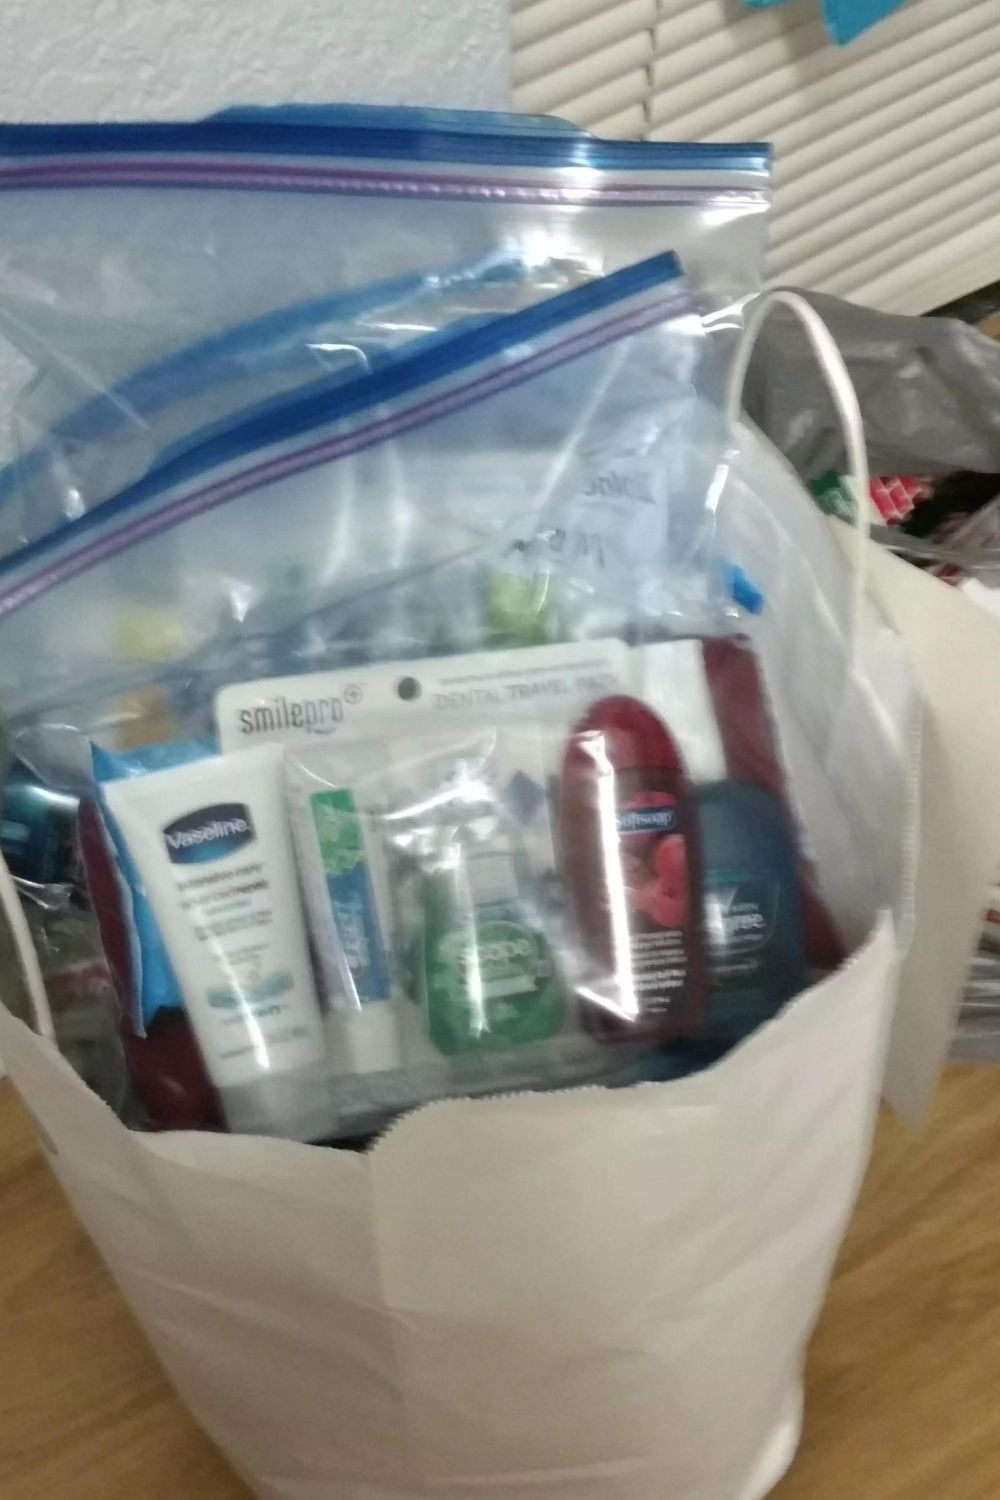 Toiletry donations placed in bags at the soup kitchen.